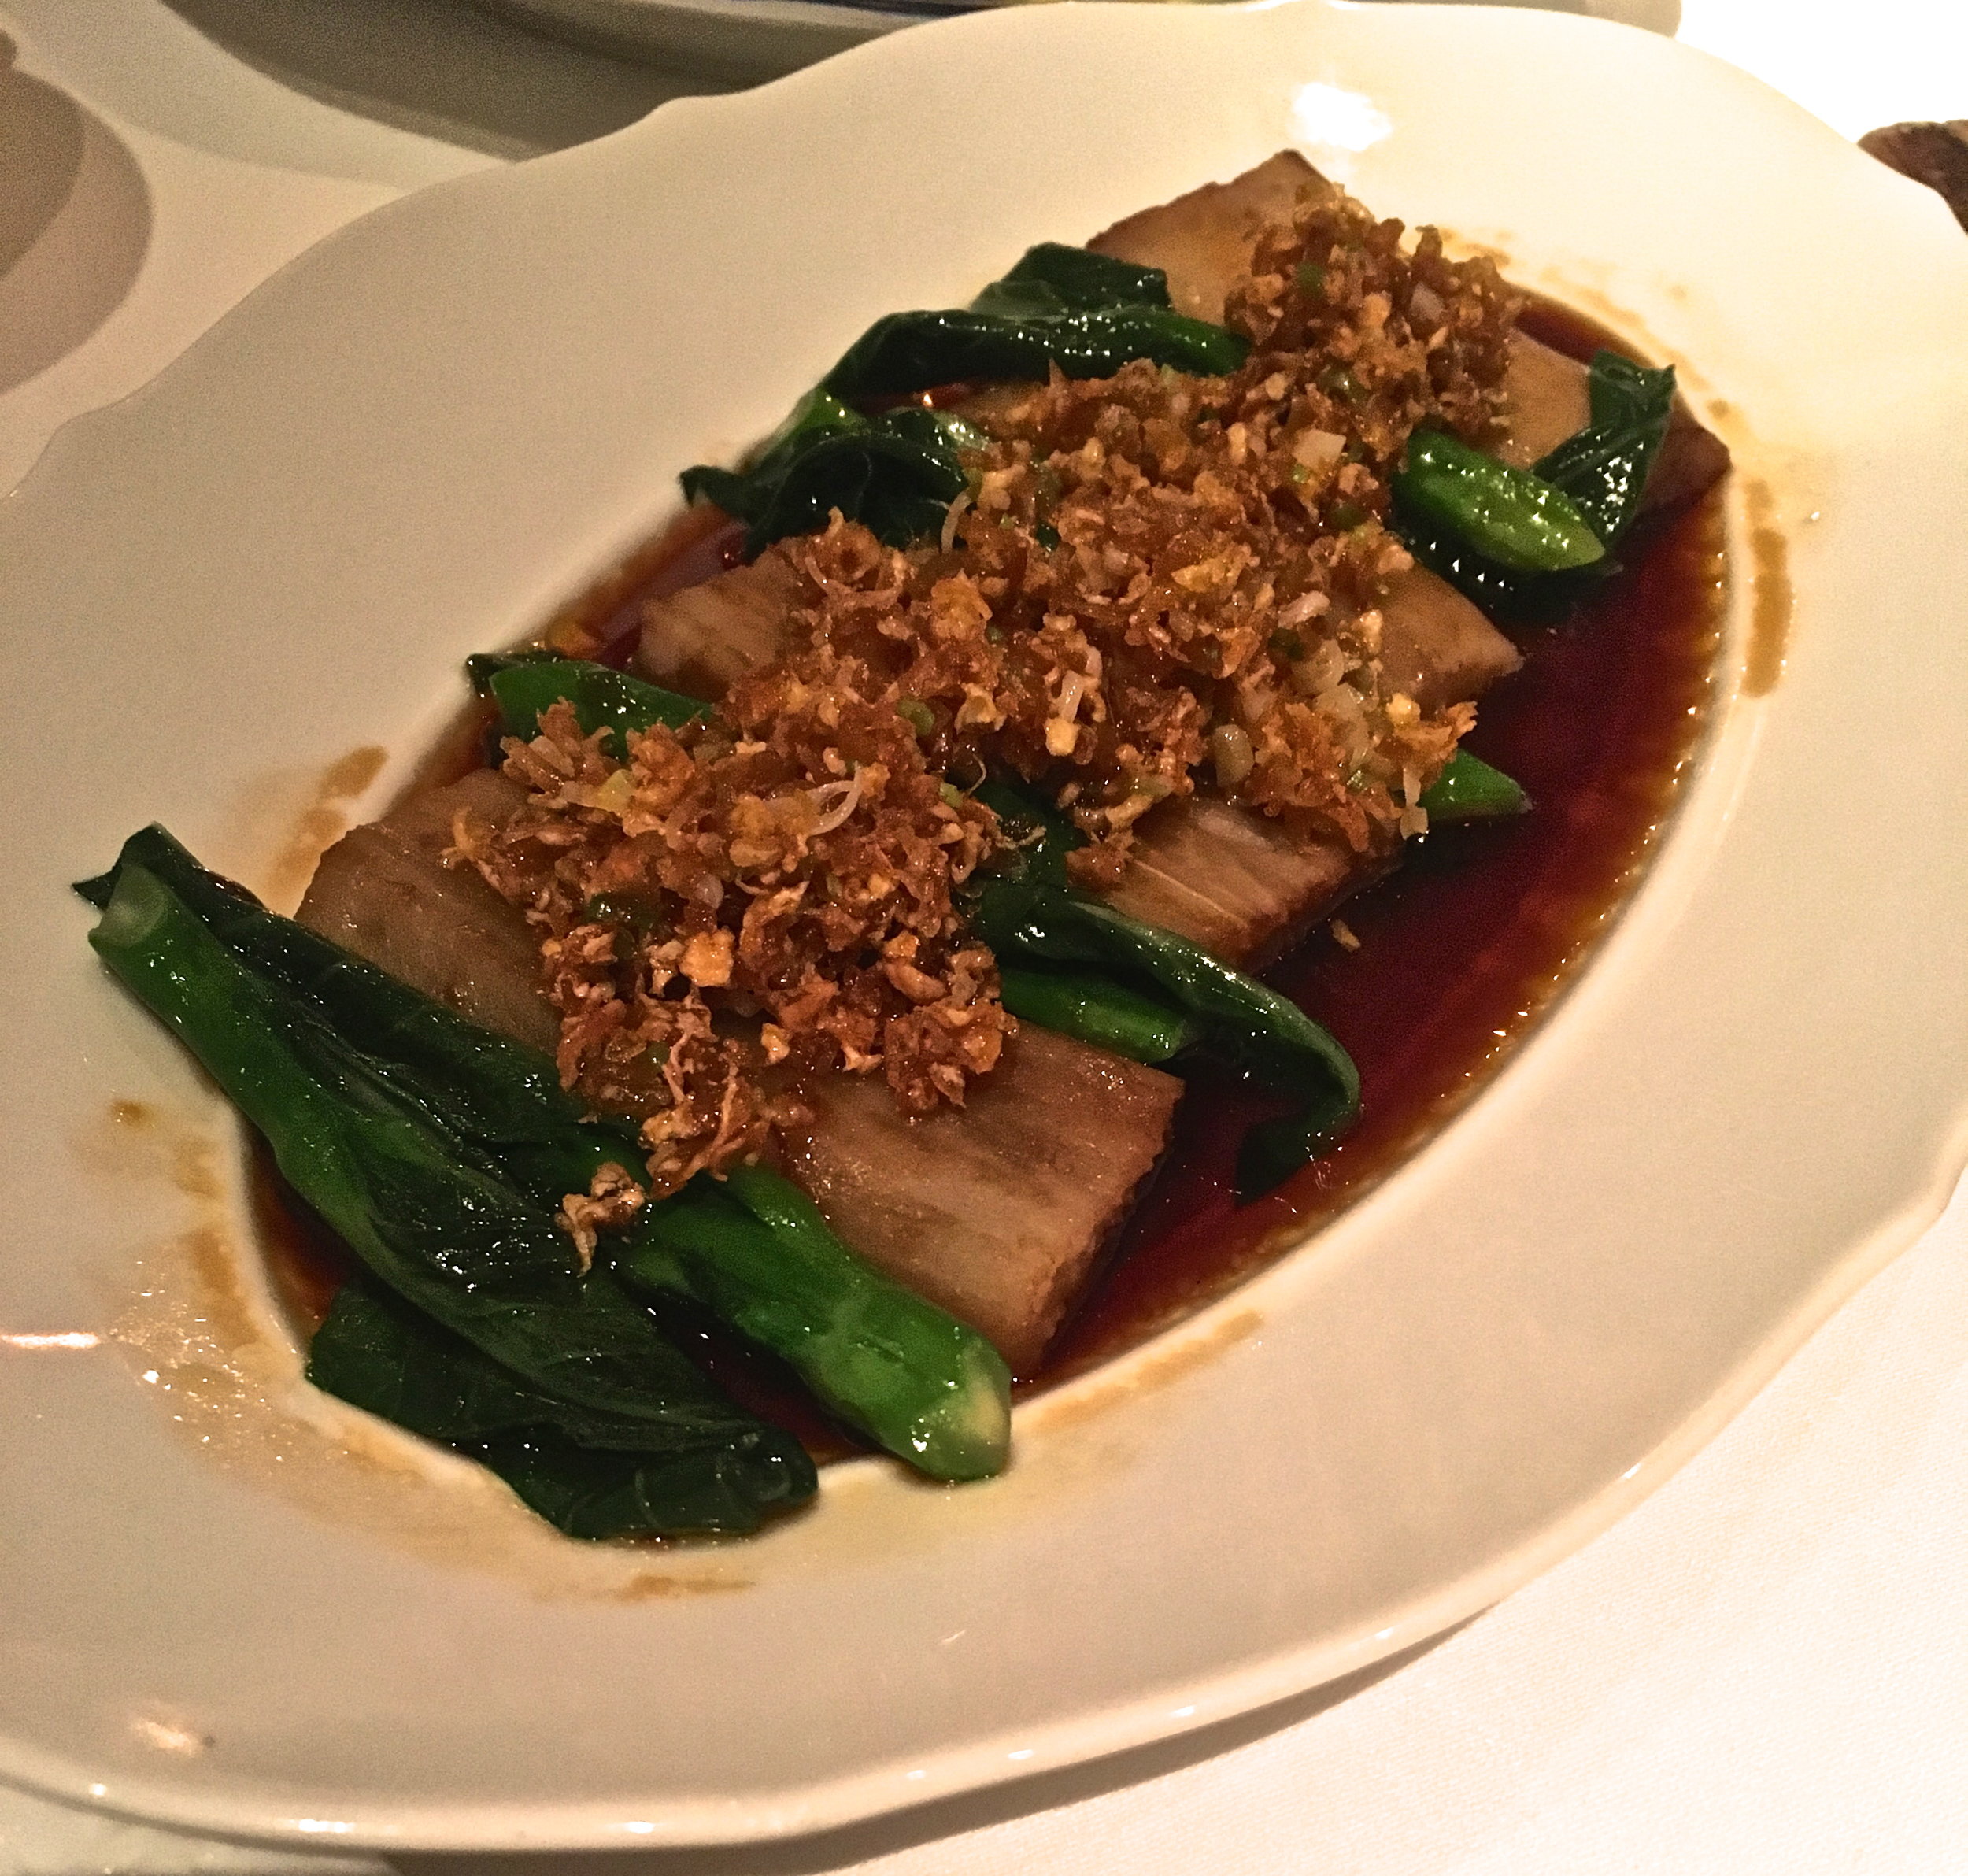 Aubergine with Chinese greens